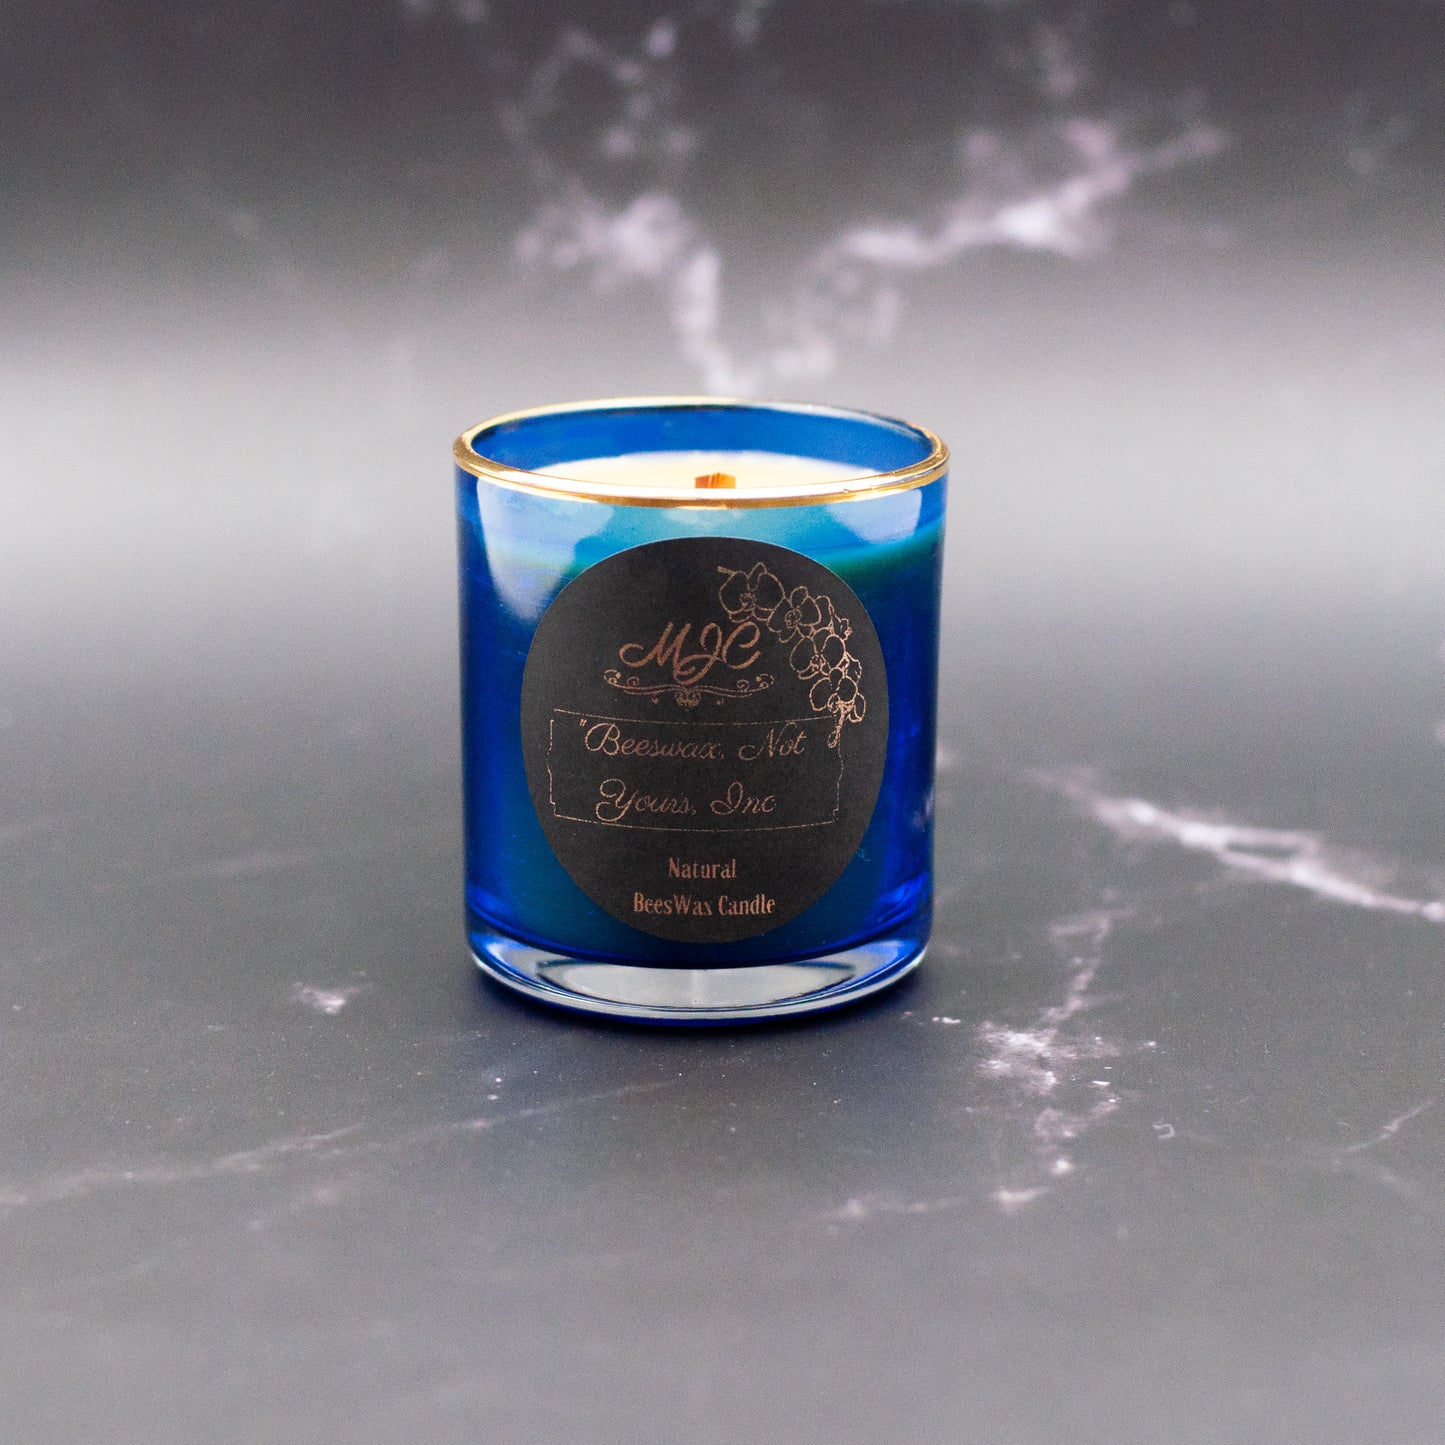 Small Pure Unscented Beeswax Candle in Navy Glass Jar 220g/7.7oz